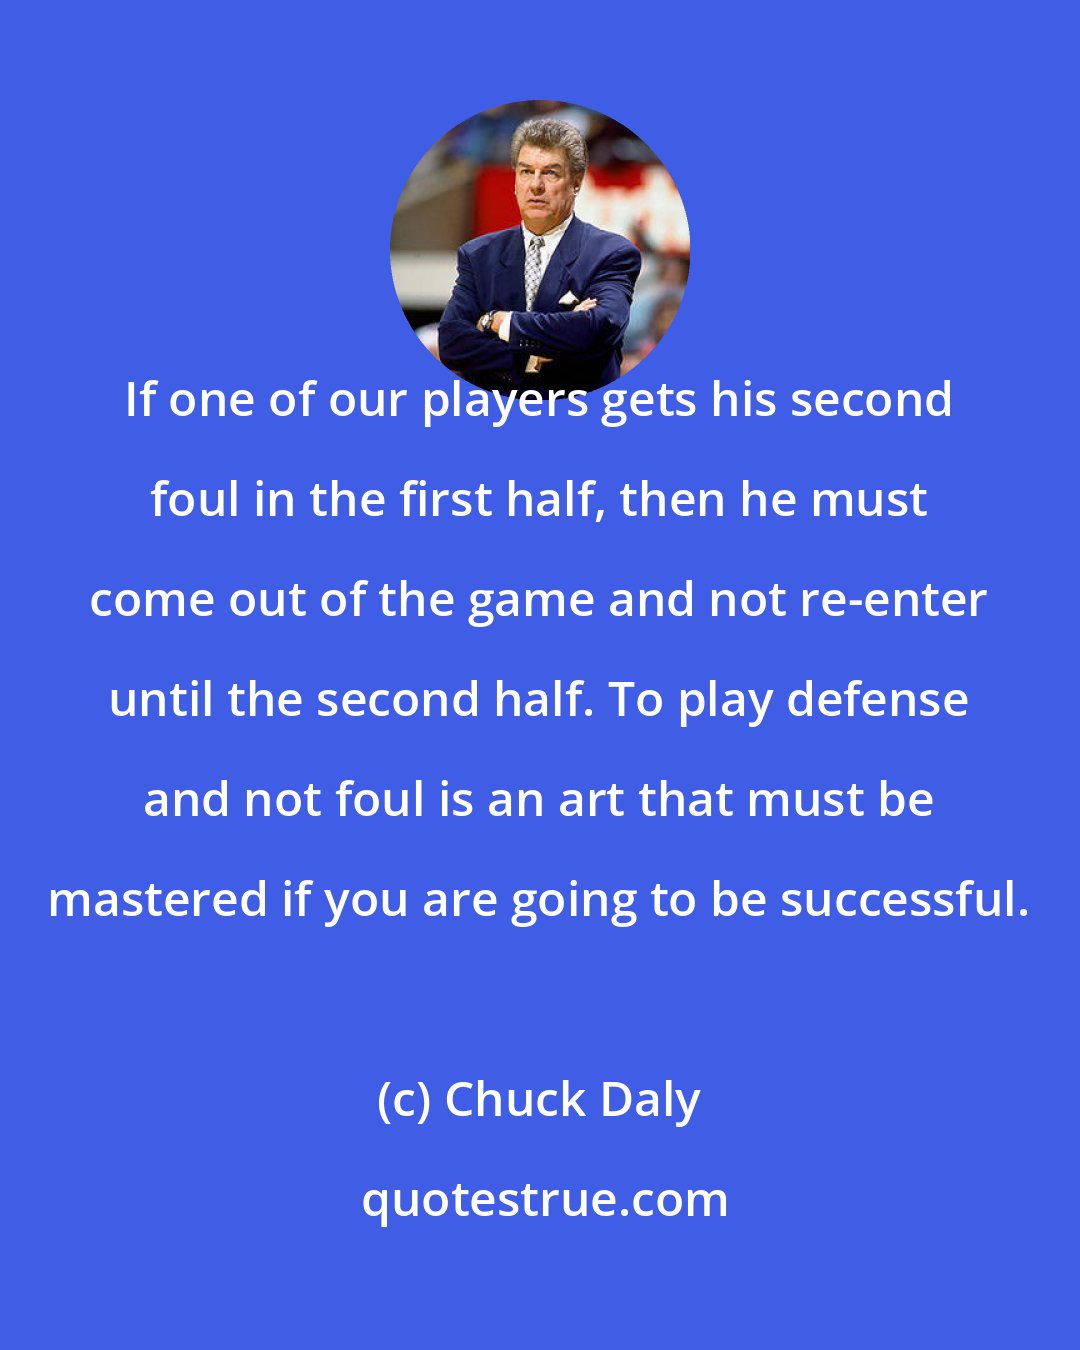 Chuck Daly: If one of our players gets his second foul in the first half, then he must come out of the game and not re-enter until the second half. To play defense and not foul is an art that must be mastered if you are going to be successful.